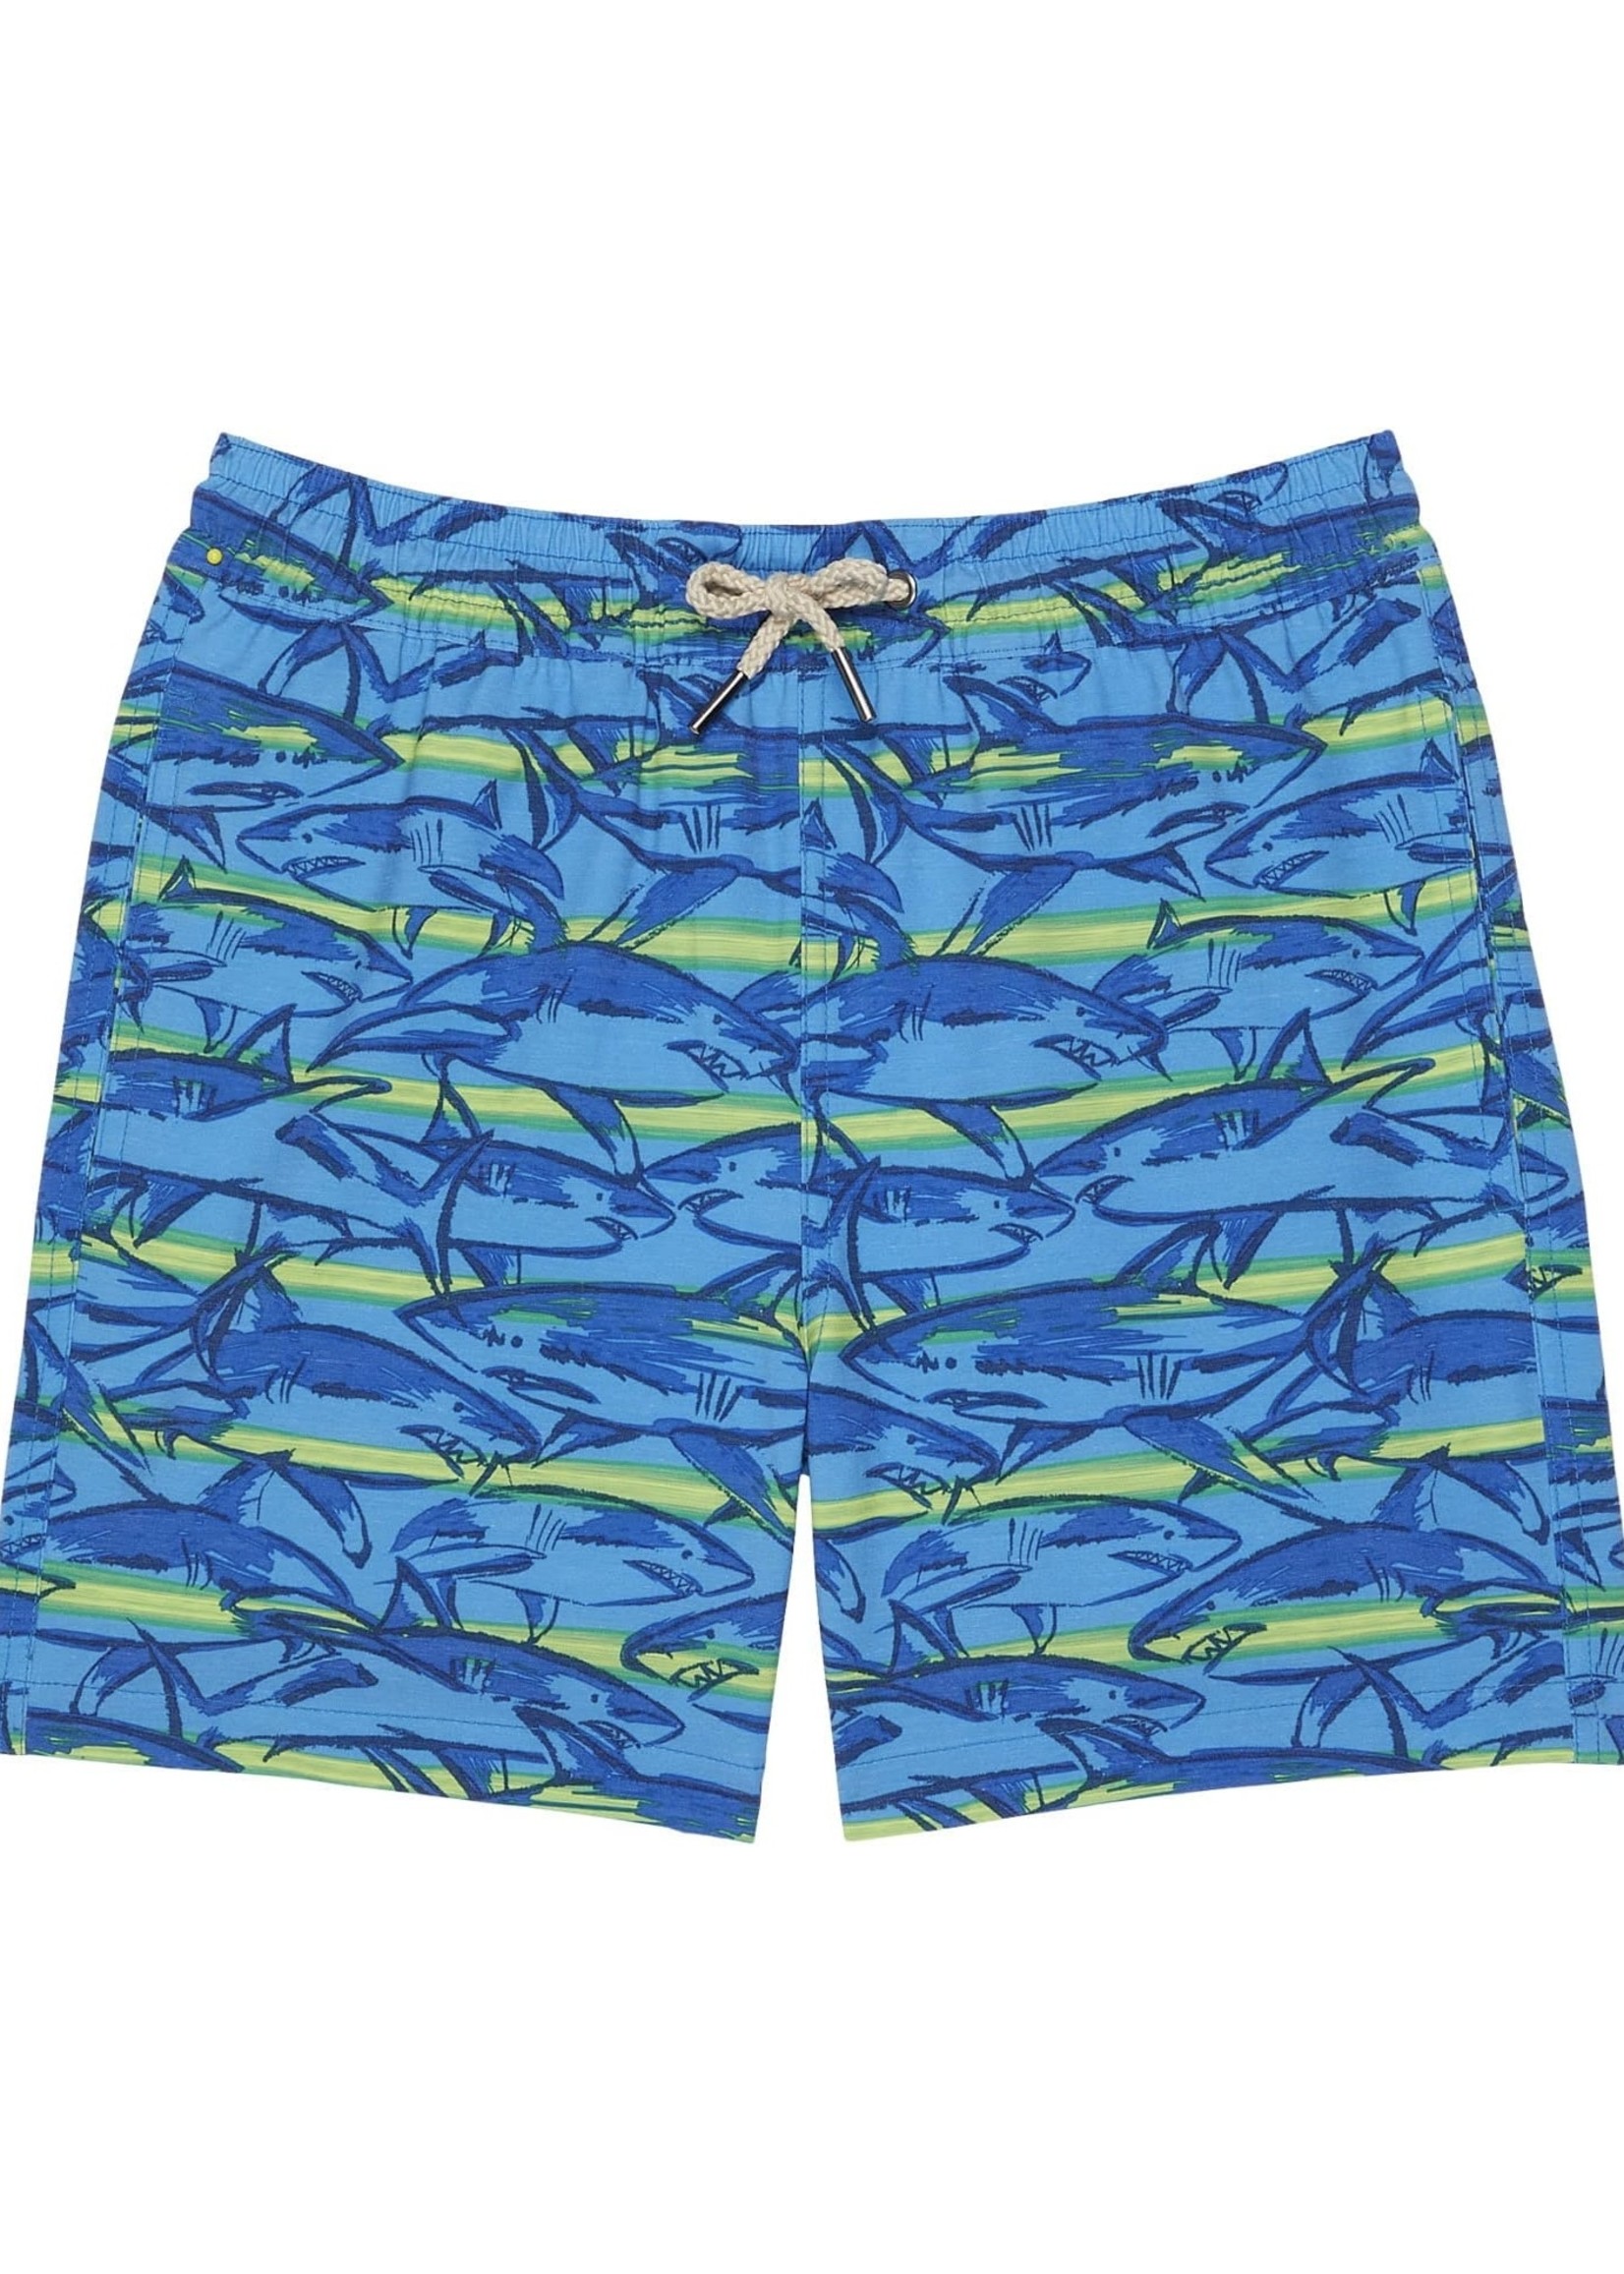 Fair Harbor Youth Bayberry Trunk